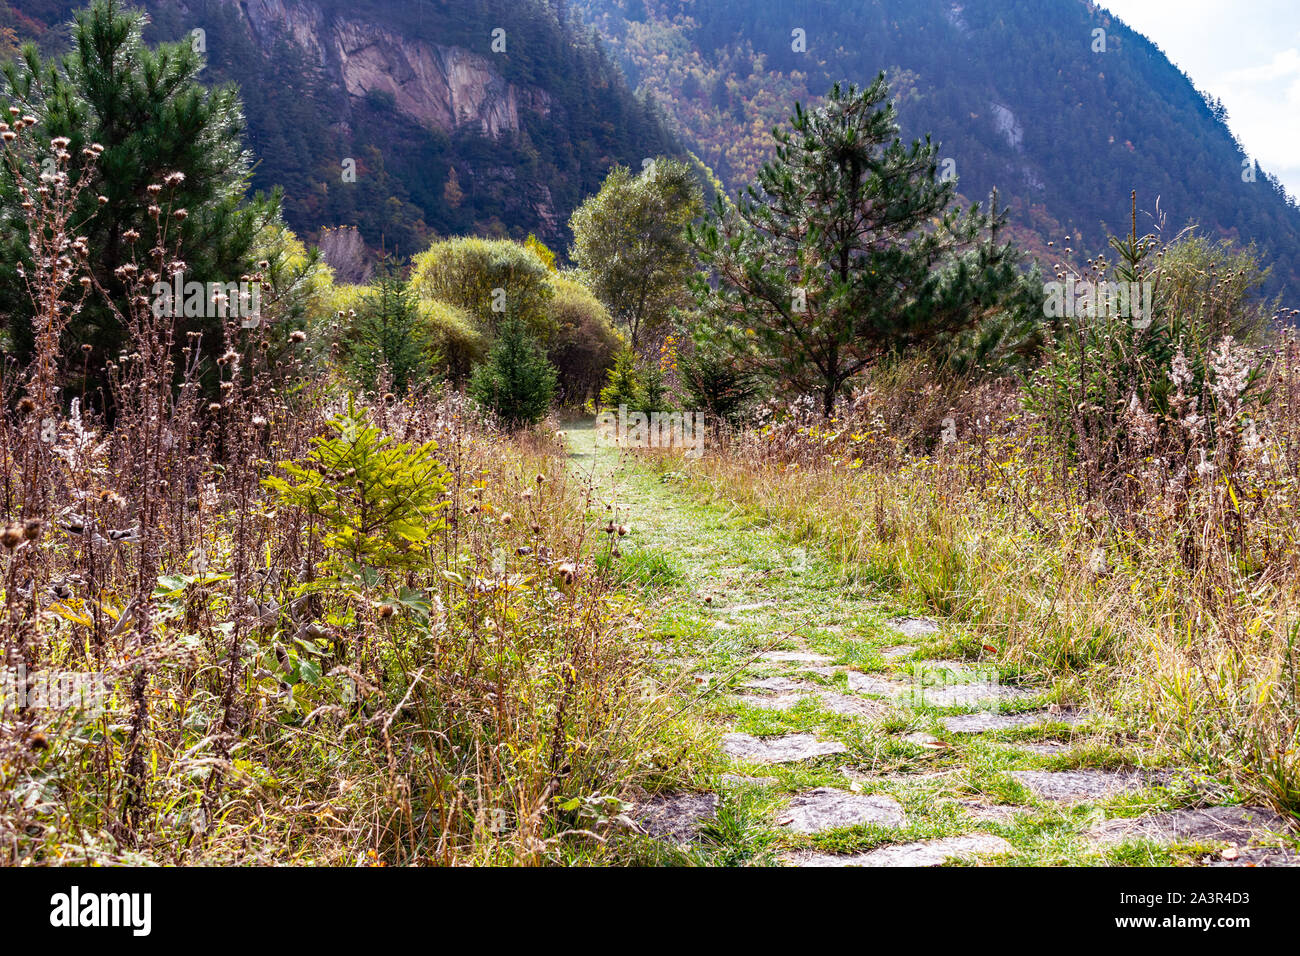 Lonely hill path with shrubbery Stock Photo